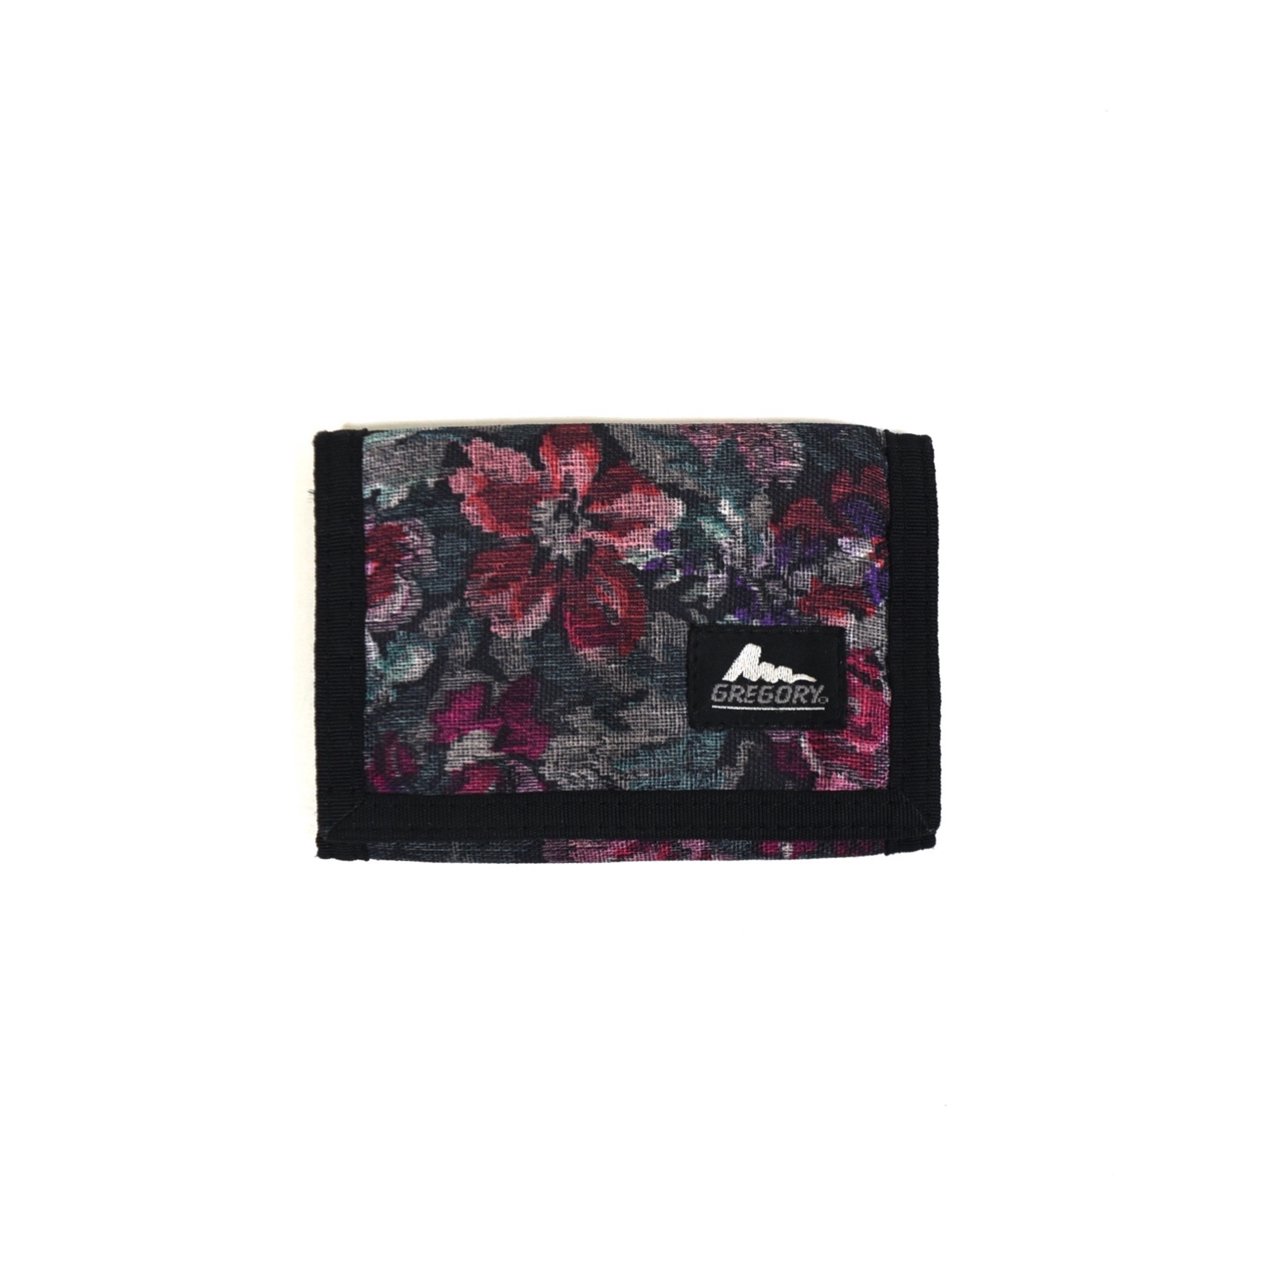 2000s GREGORY Nylon wallet Floral tapestry